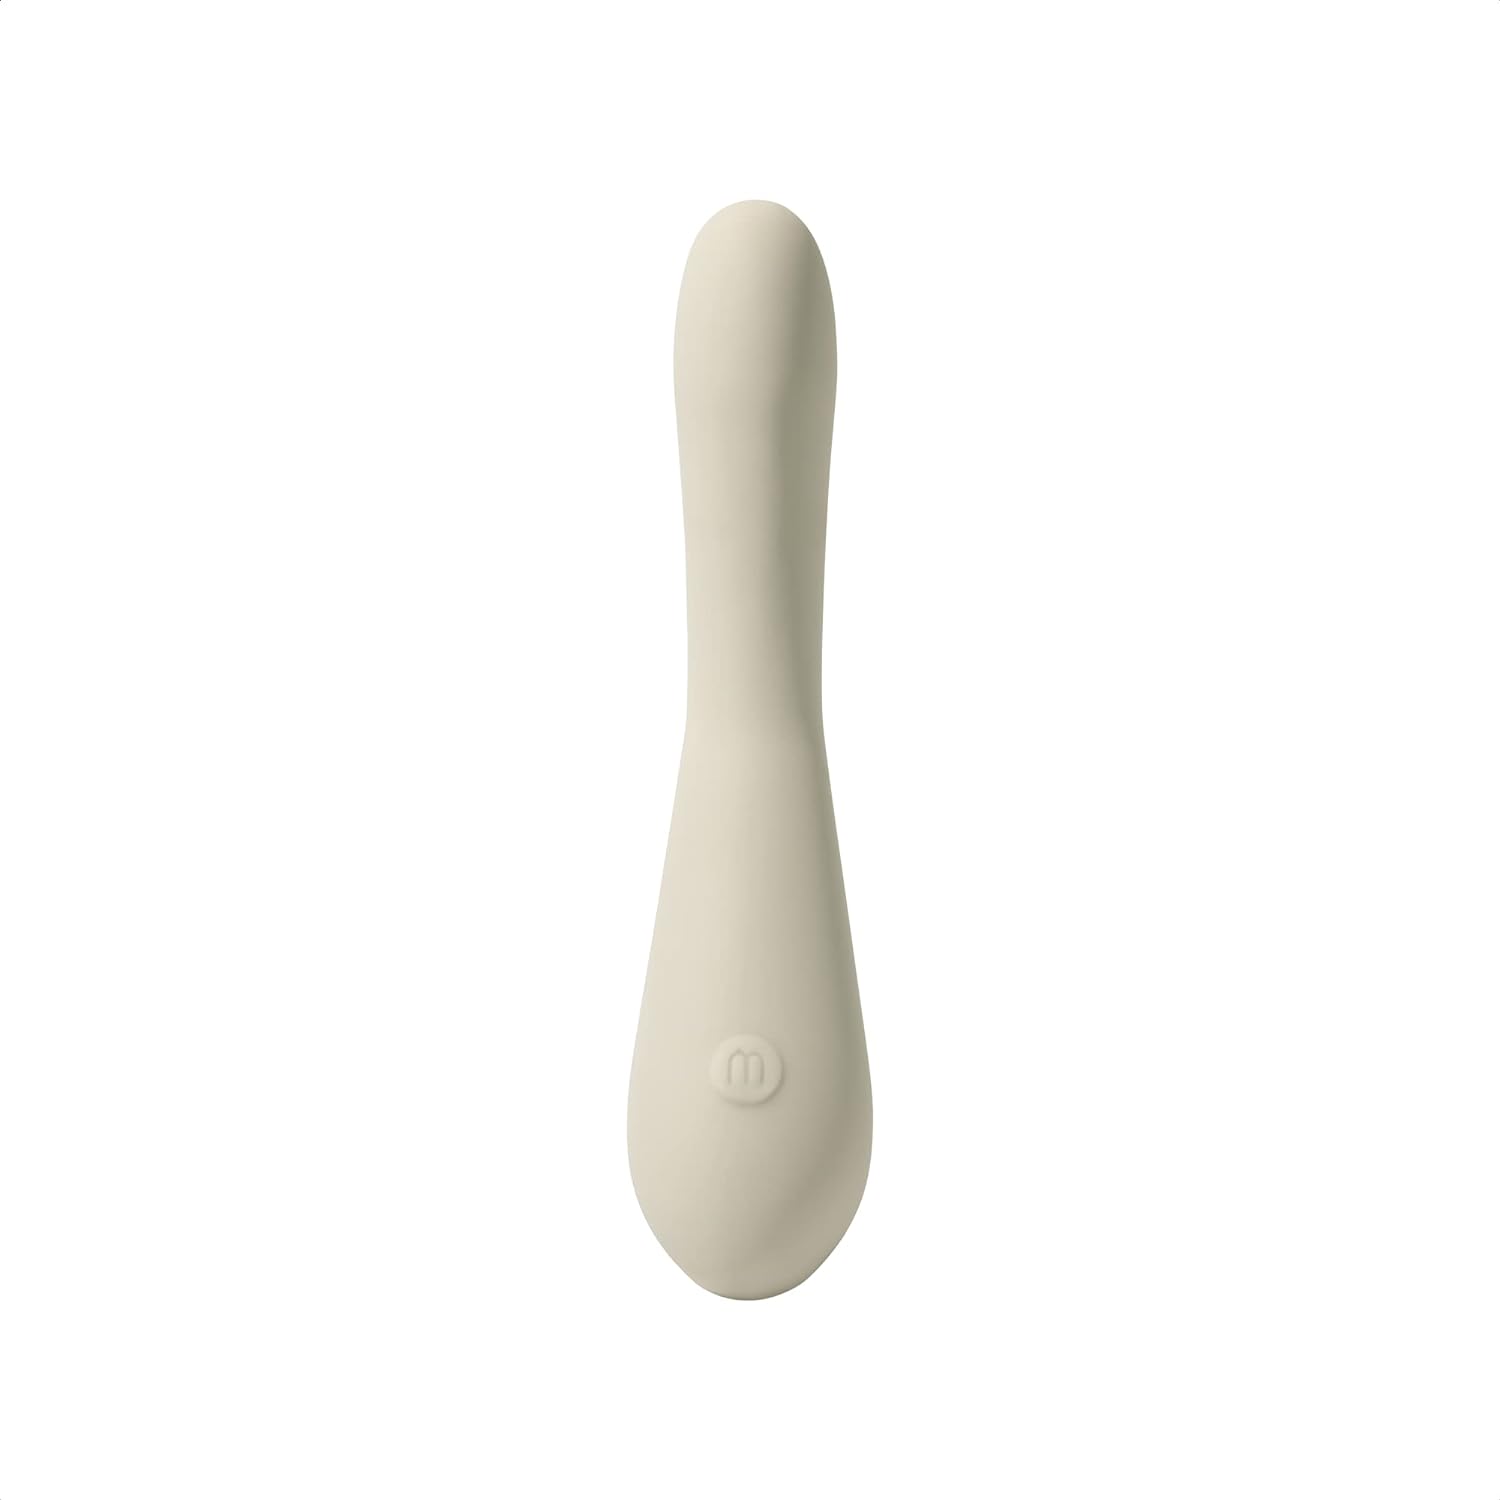 Maude Spot in Grey - 5 Speed Easy-to-Use Cordless Massager - Platinum